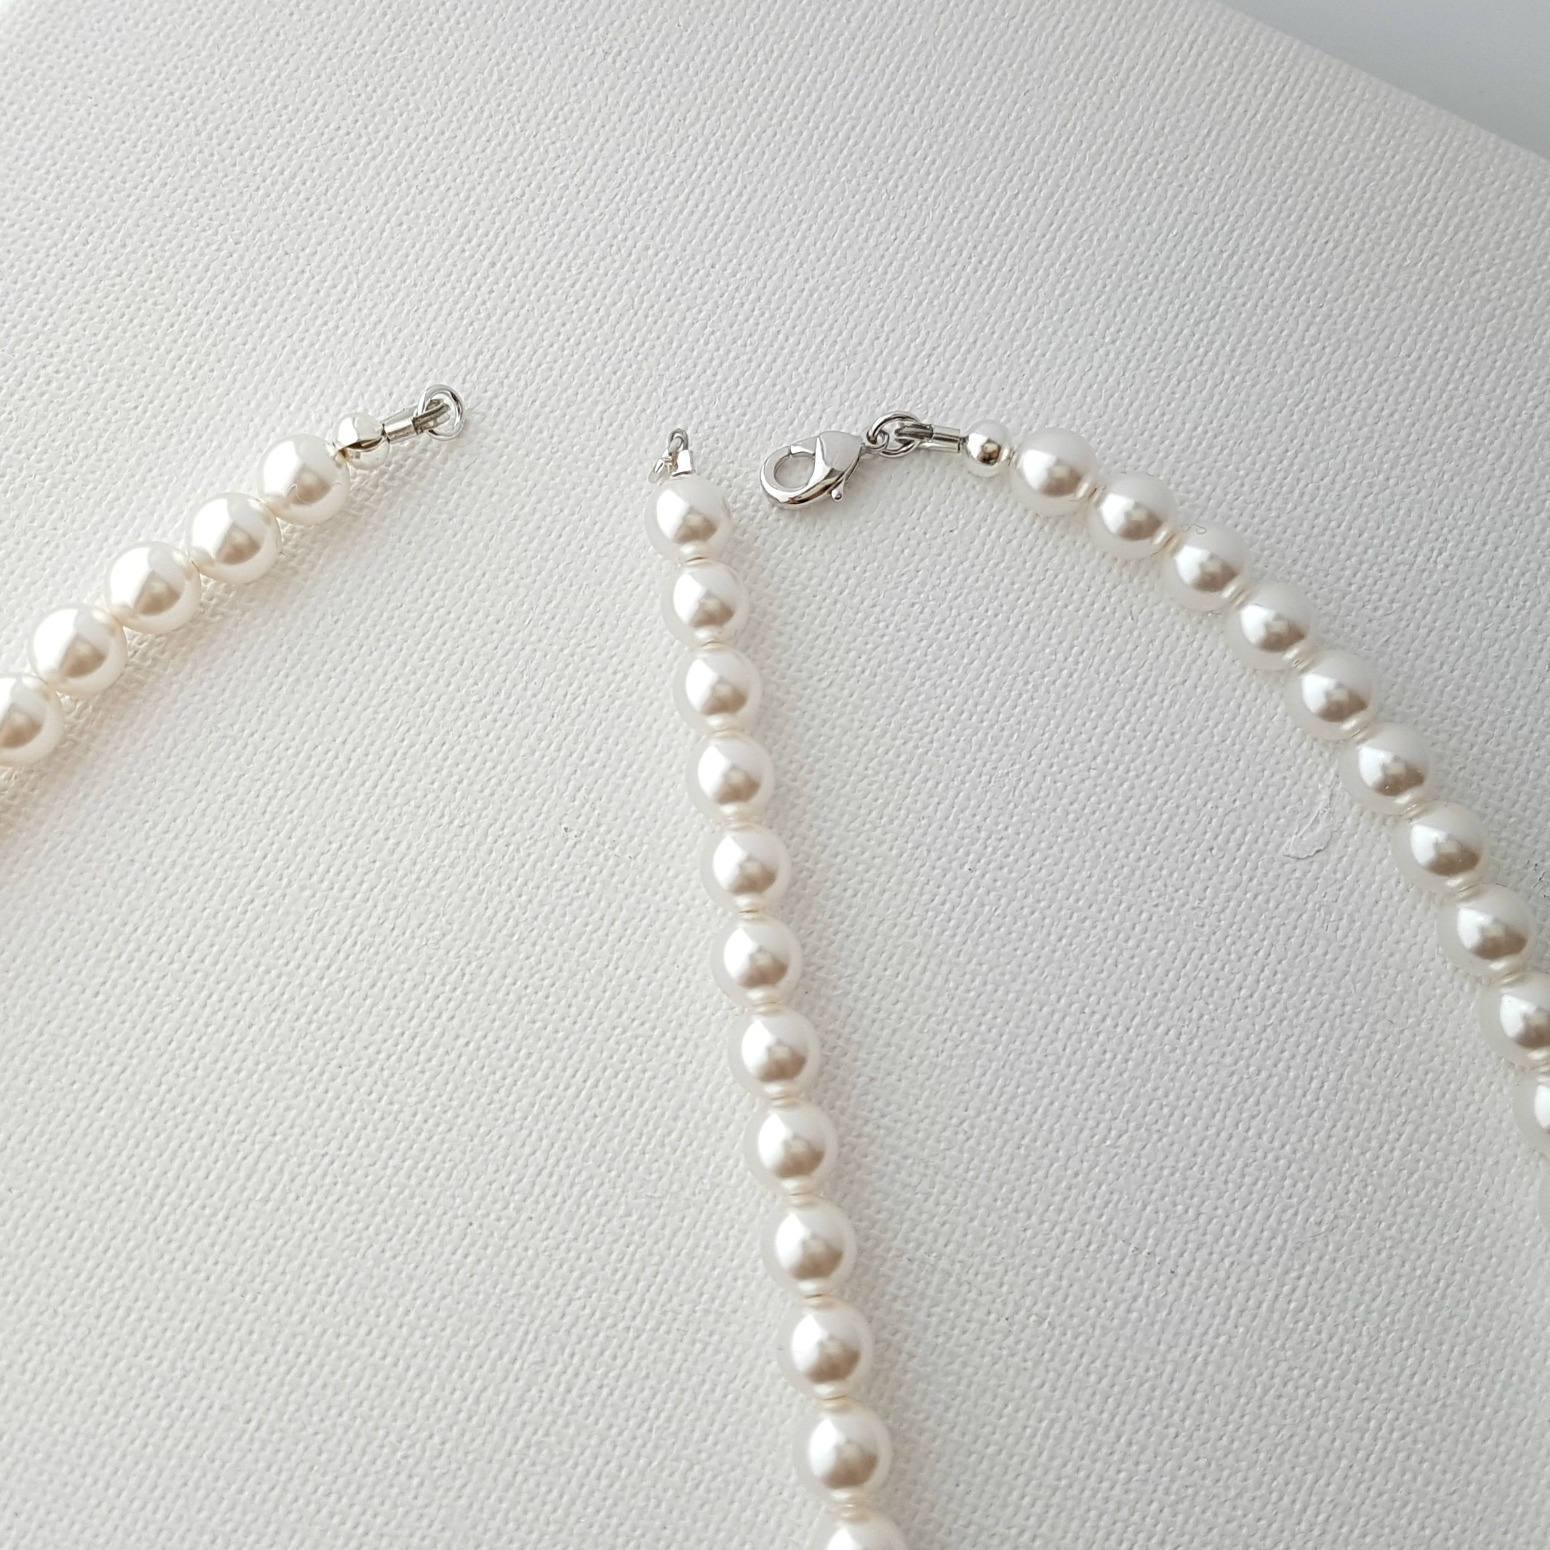 Necklace Extension, Back Necklace, Chain Extender, Pearl Back Necklace,  Backdrop Necklace, Pearl Back Drop Necklace, Freshwater Pearls 